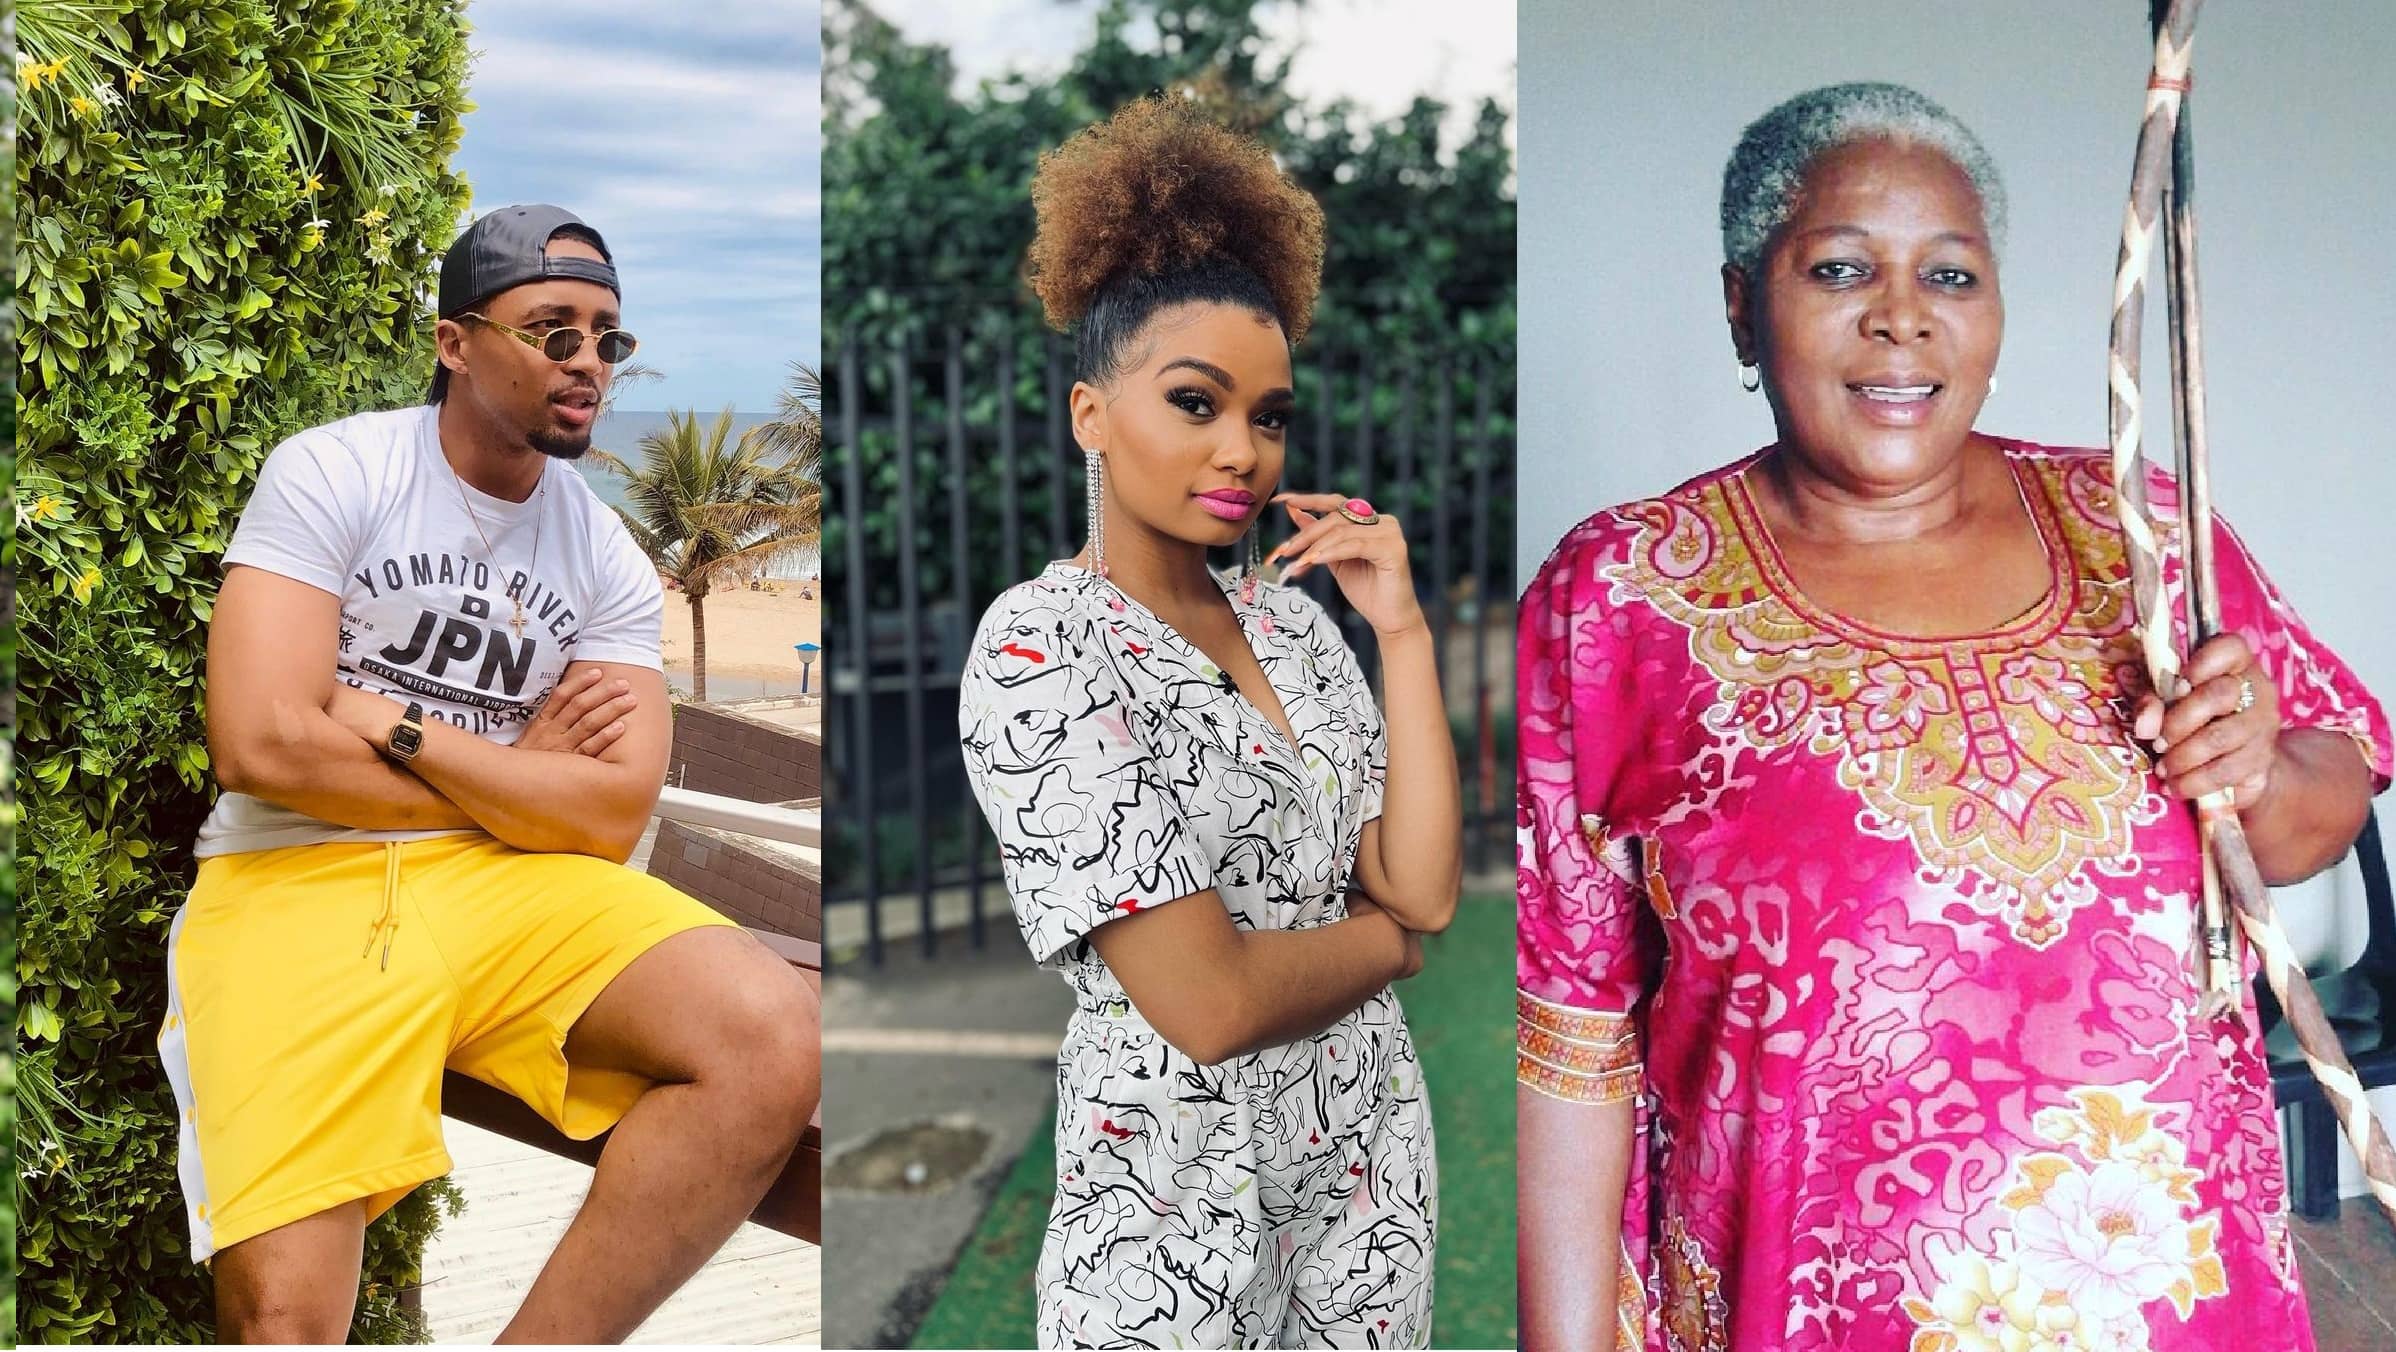 Uzalo brings in Thembi Nyandeni, Hope Mbhele and Sandile Mfusi as new editions to their cast